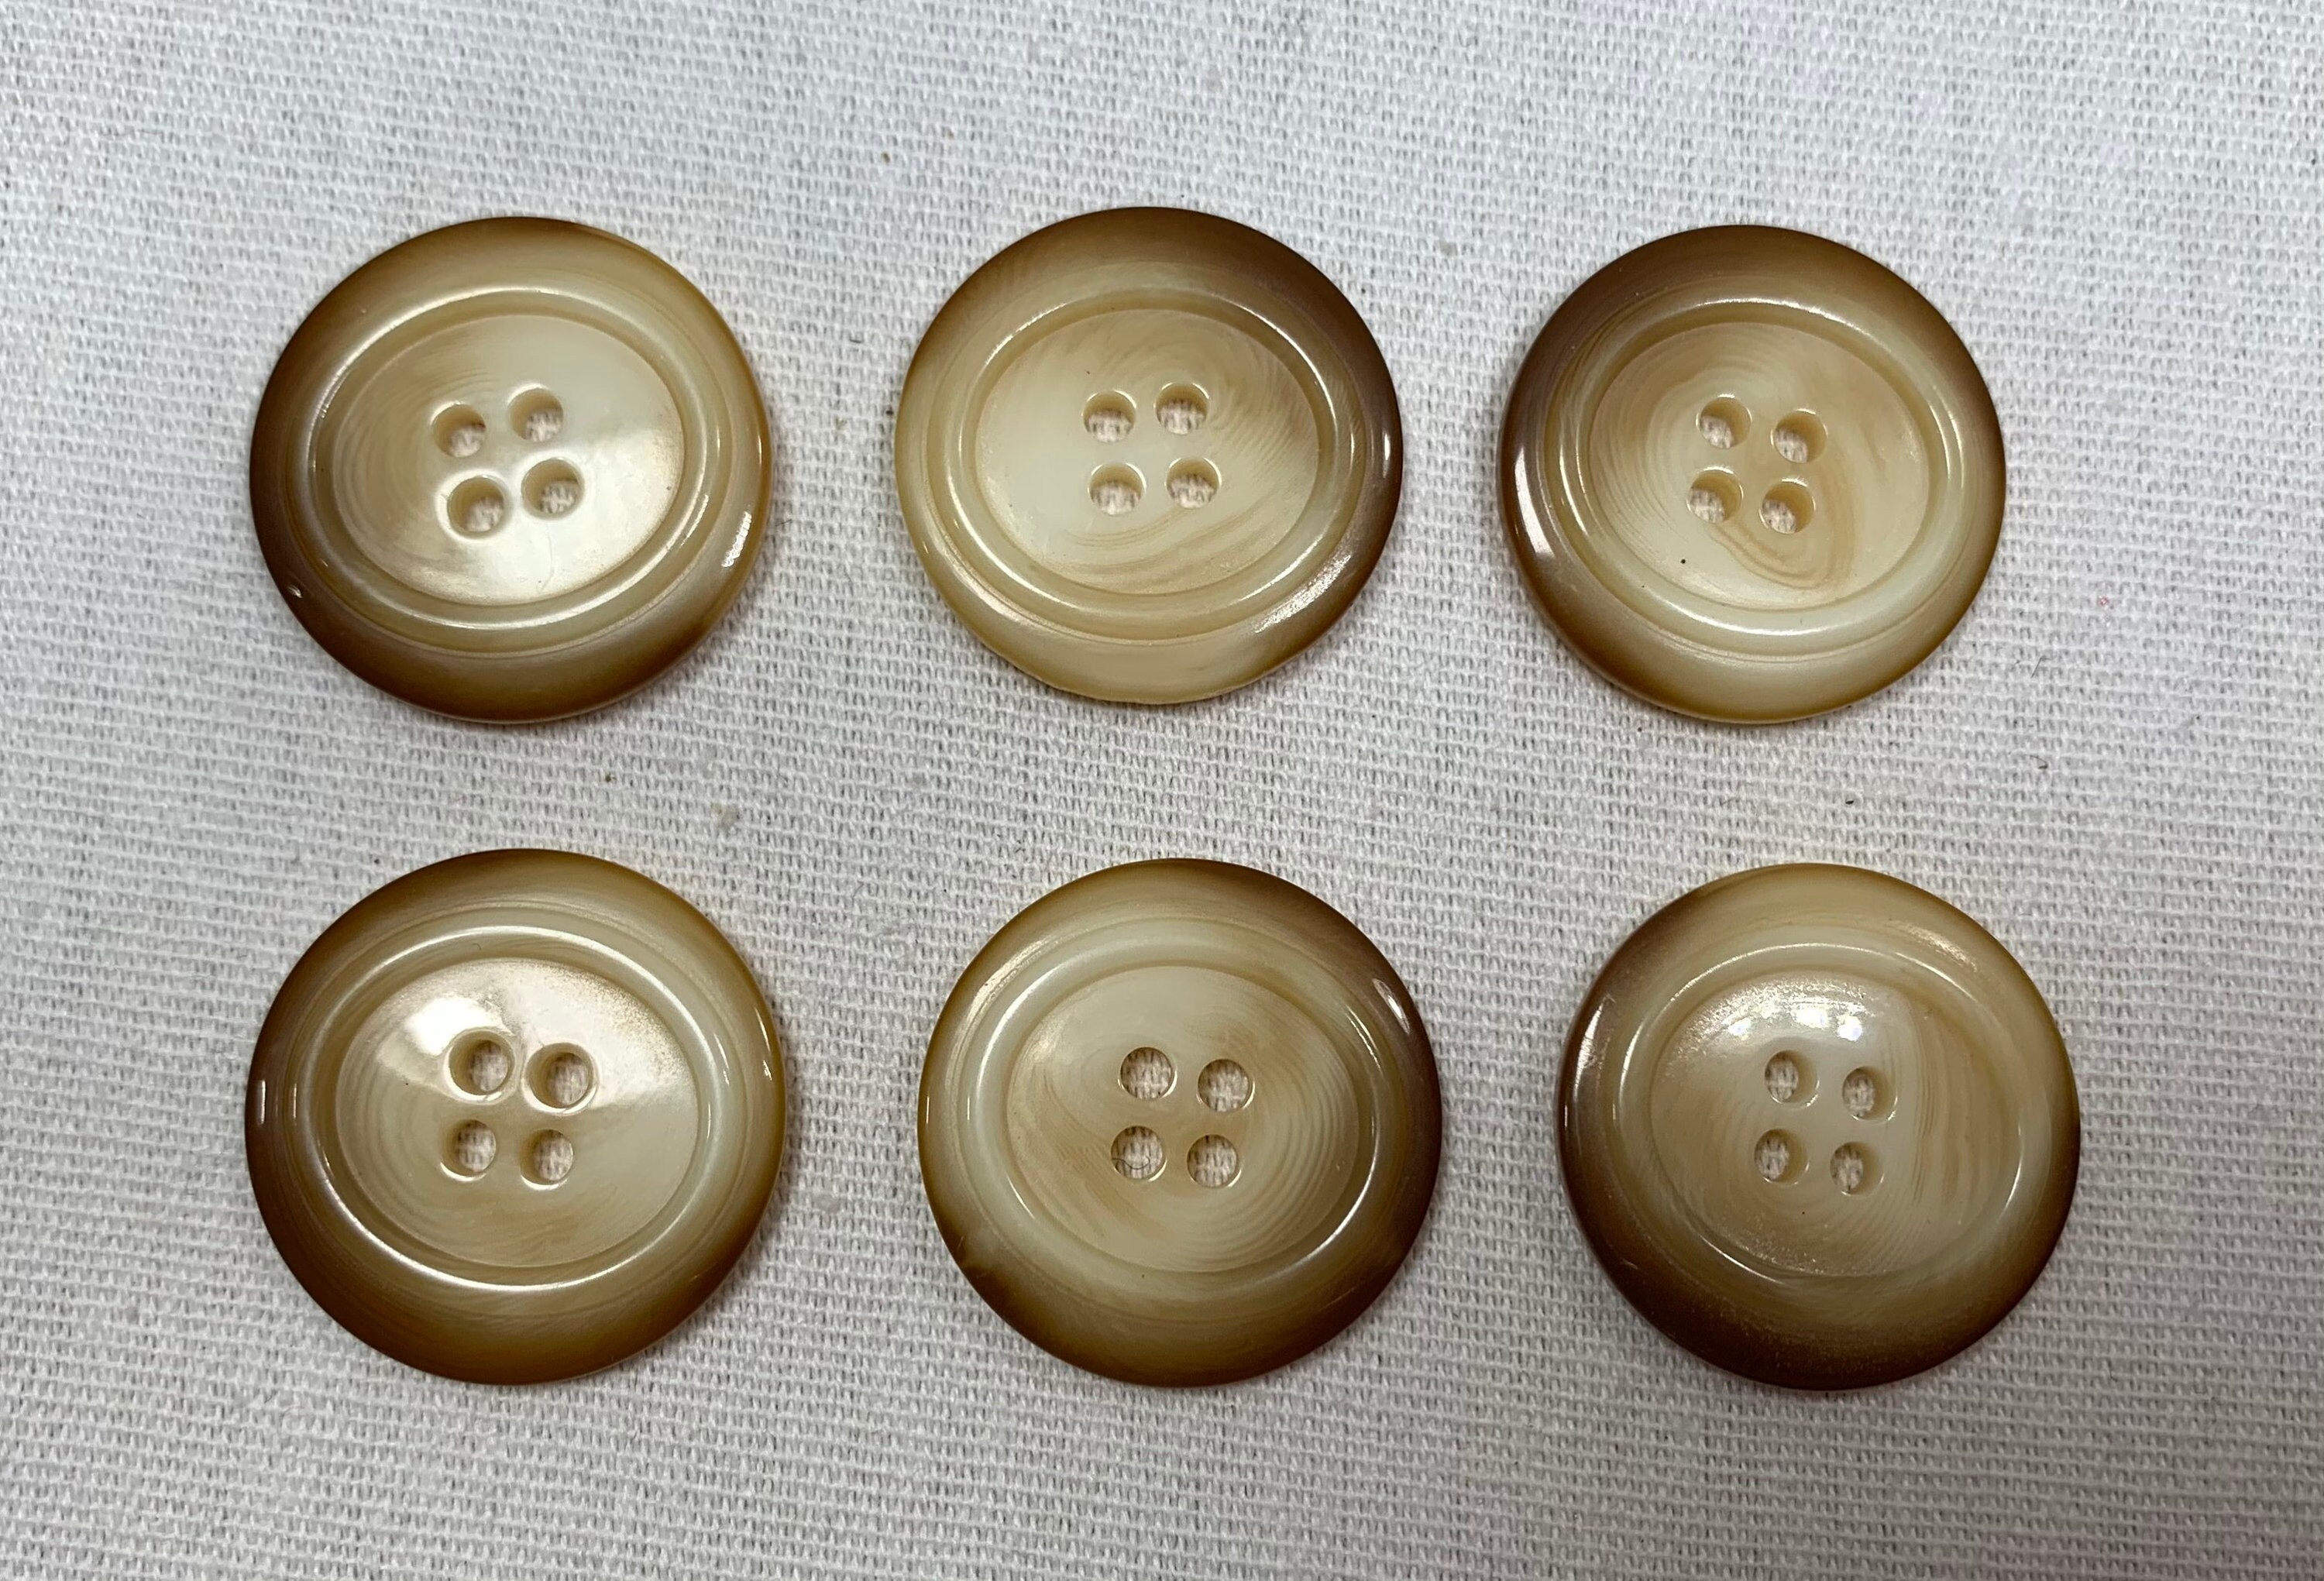 Large buttons marbled light brown and tan plastic sewing | Etsy